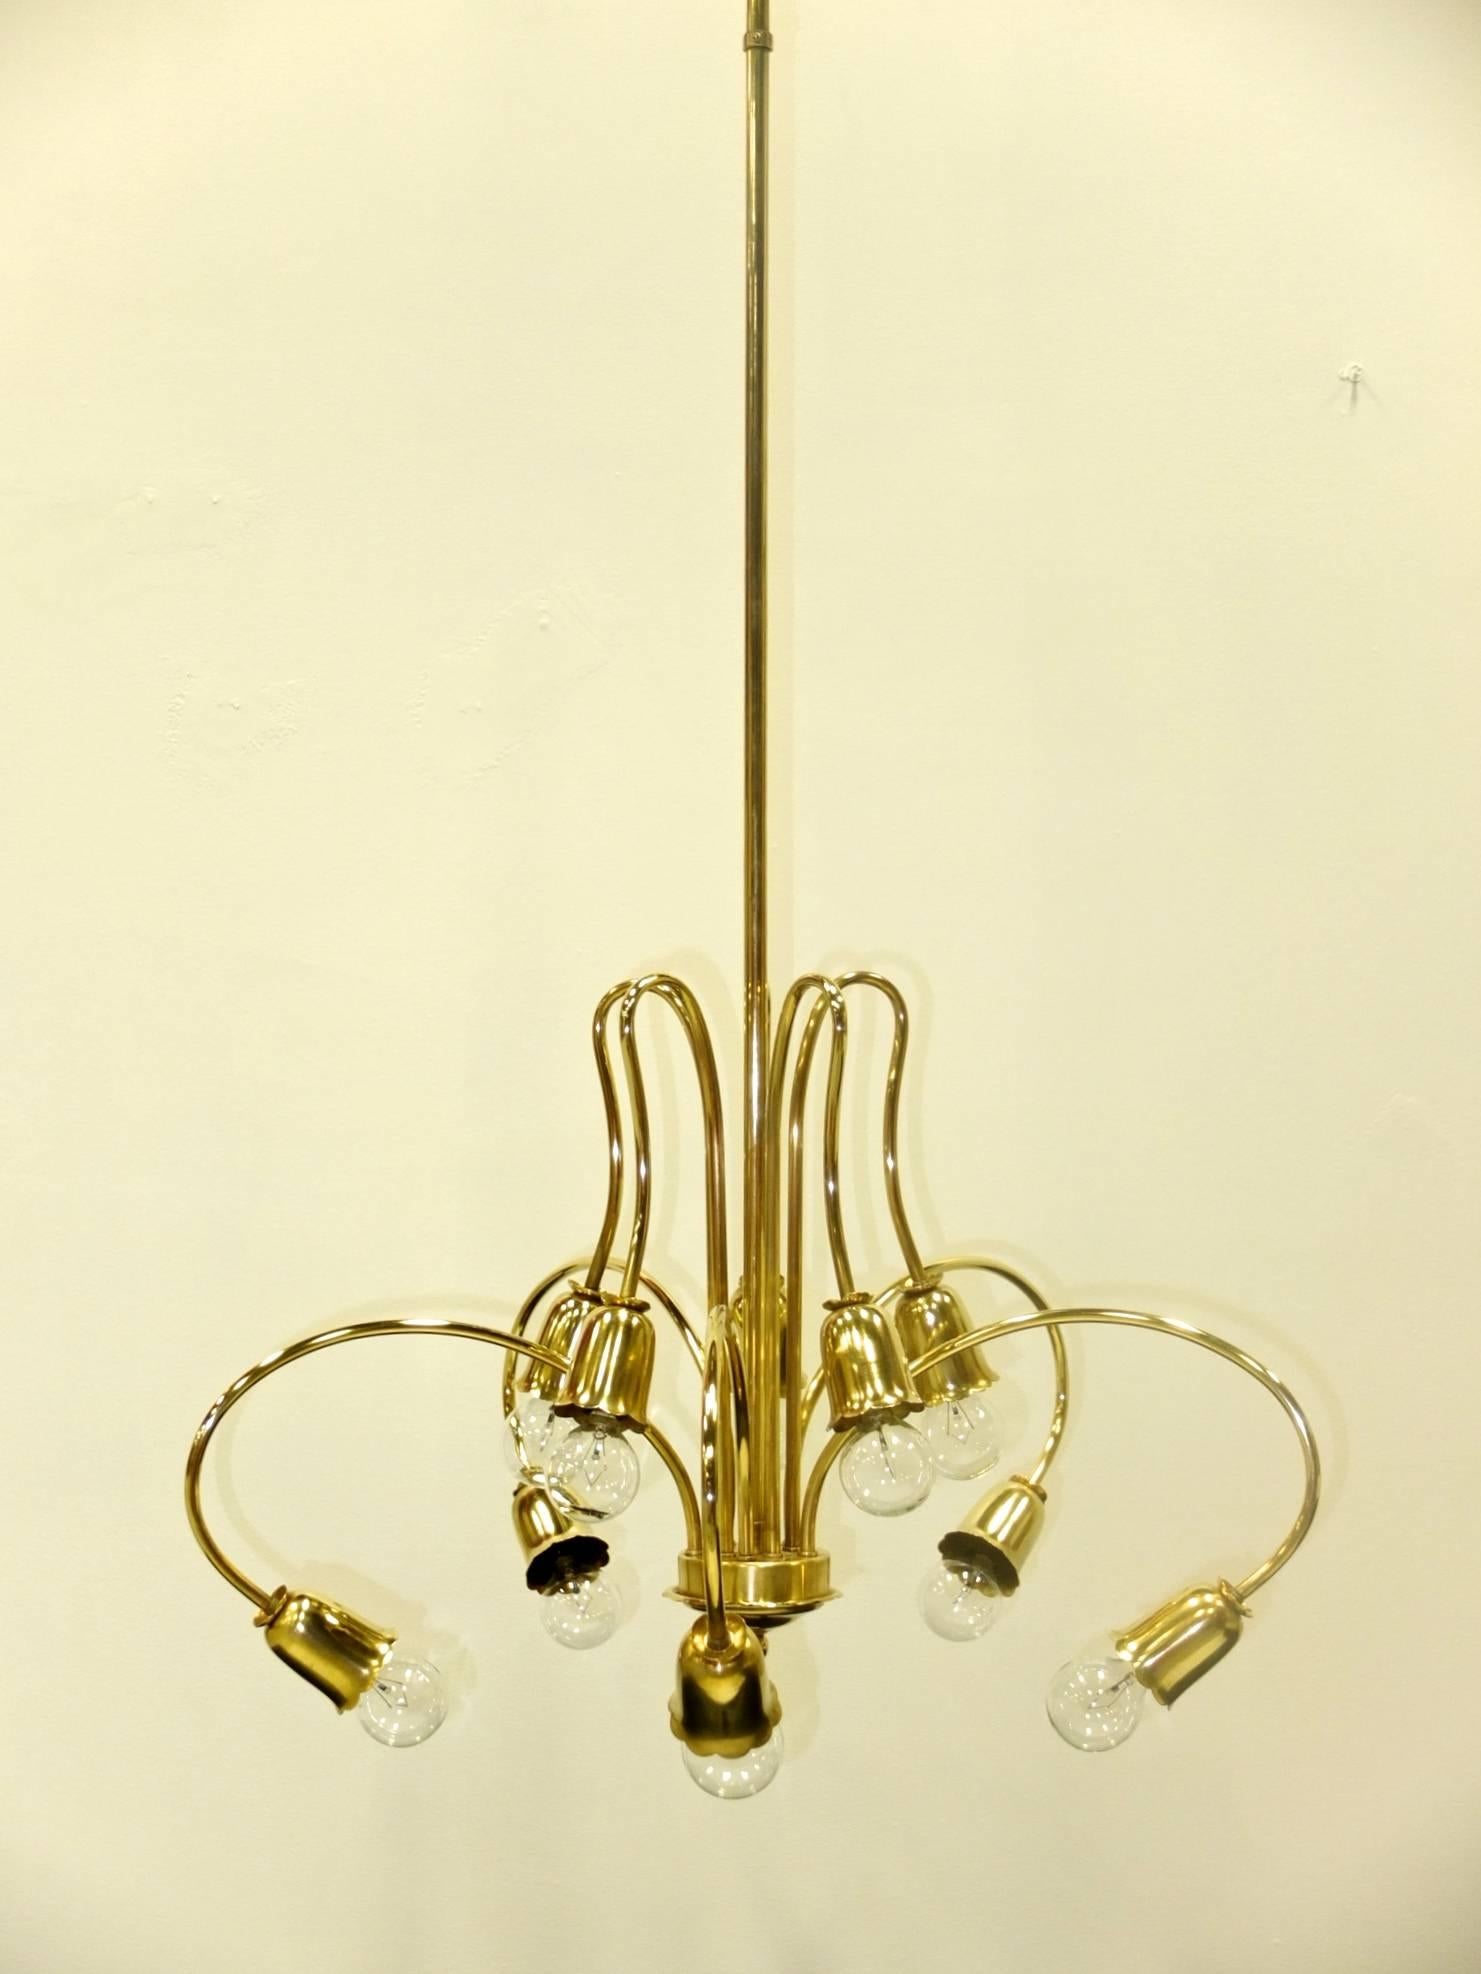 1950s Italian chandelier with ten extravagantly bent tubular brass arms terminating in scalloped edge bell form socket cups and daintily scalloped collars.

Rewired. Each socket takes a single candelabra size bulb up to 60 watts each.

Stem can